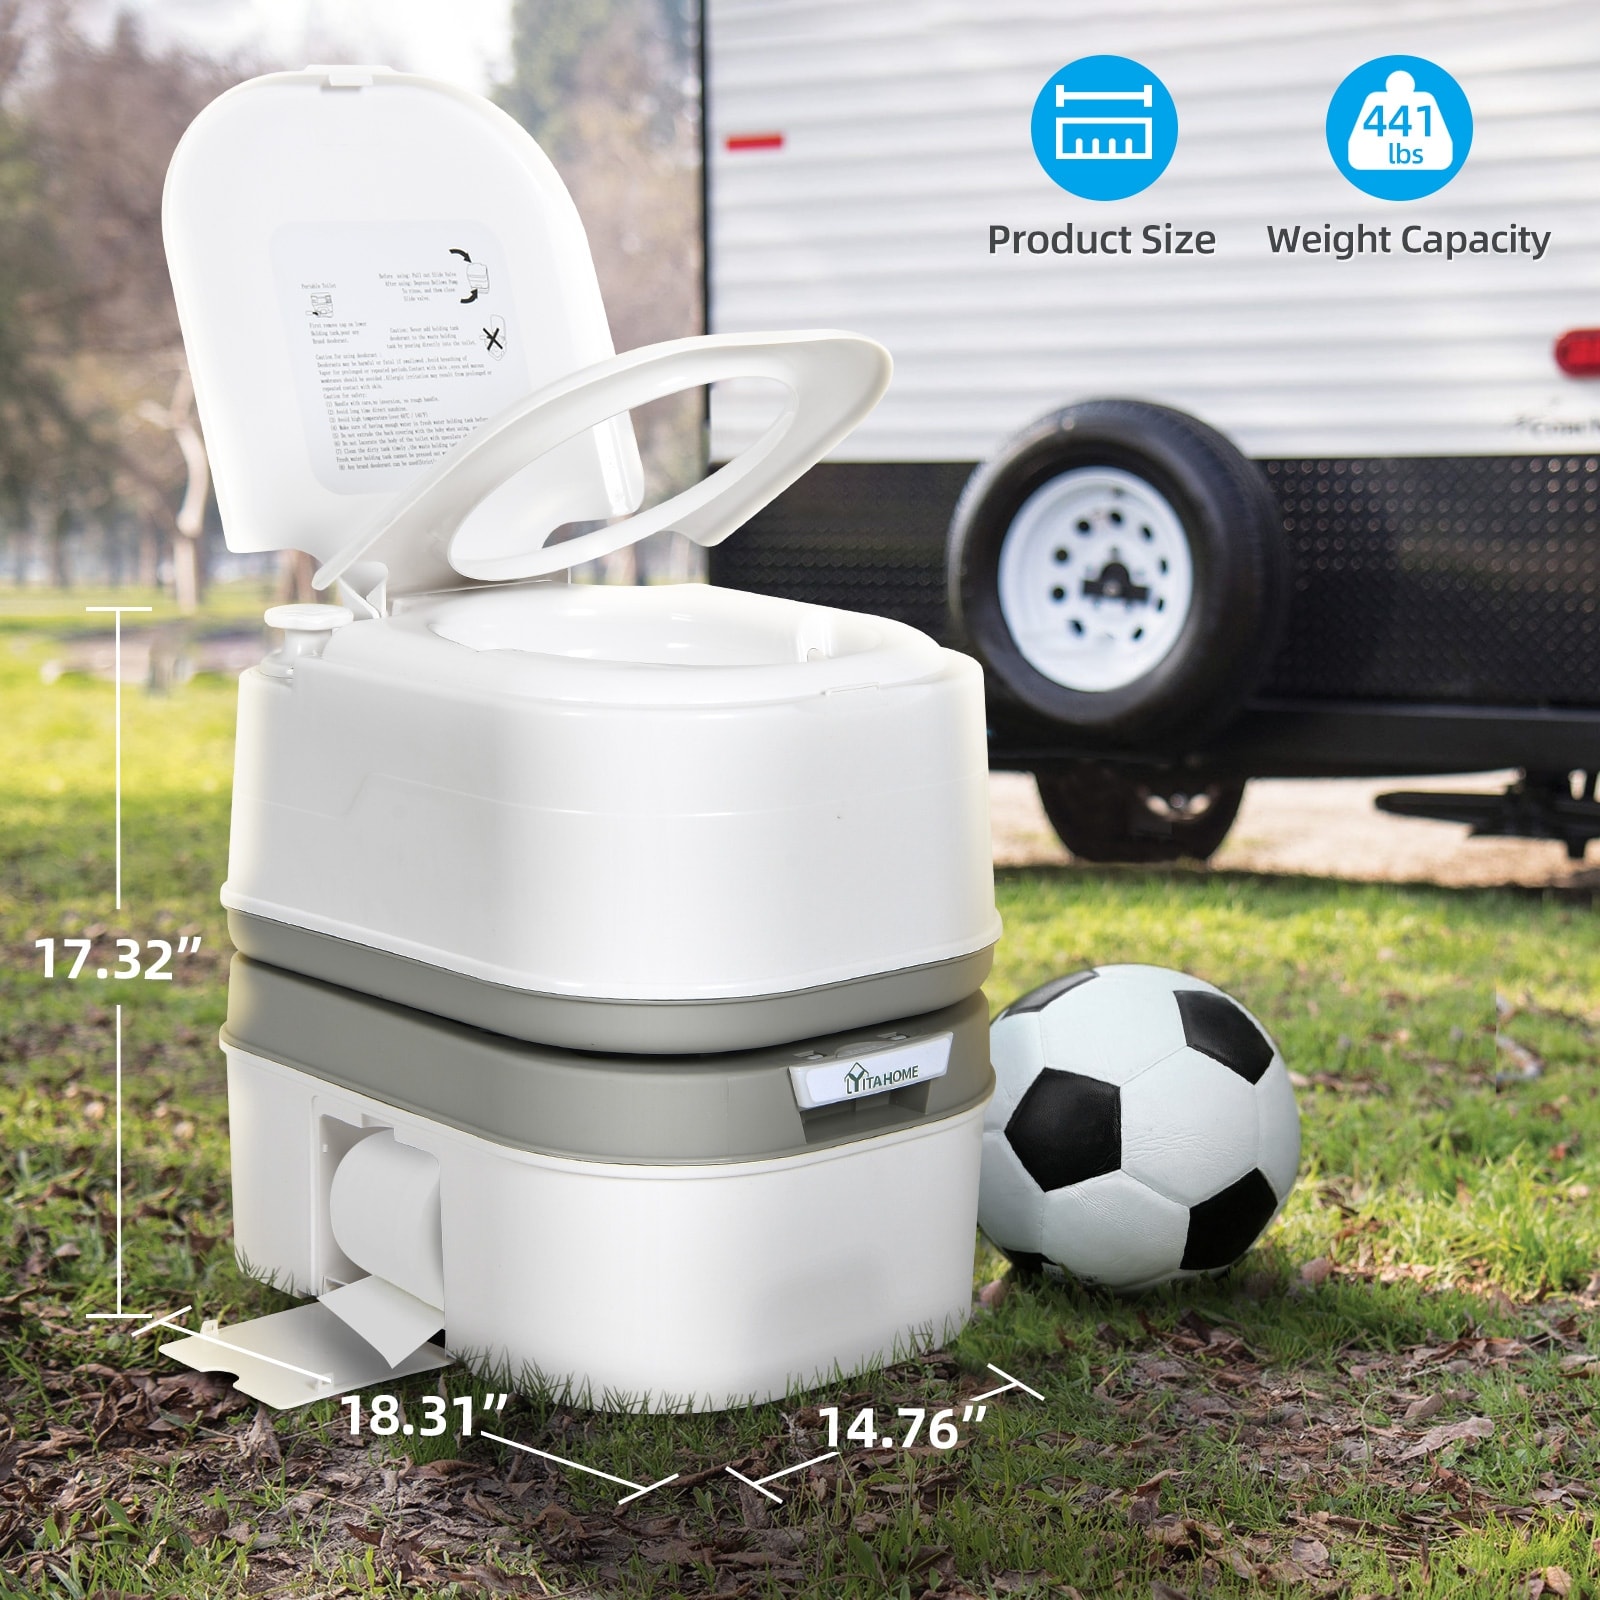 US Camping Supply Portable Toilet with Carry Bag, 5.3 Gallon Waste Tank -  Compact Indoor Outdoor Dual Outlet Commode - Travel, Camping, RV, Boating